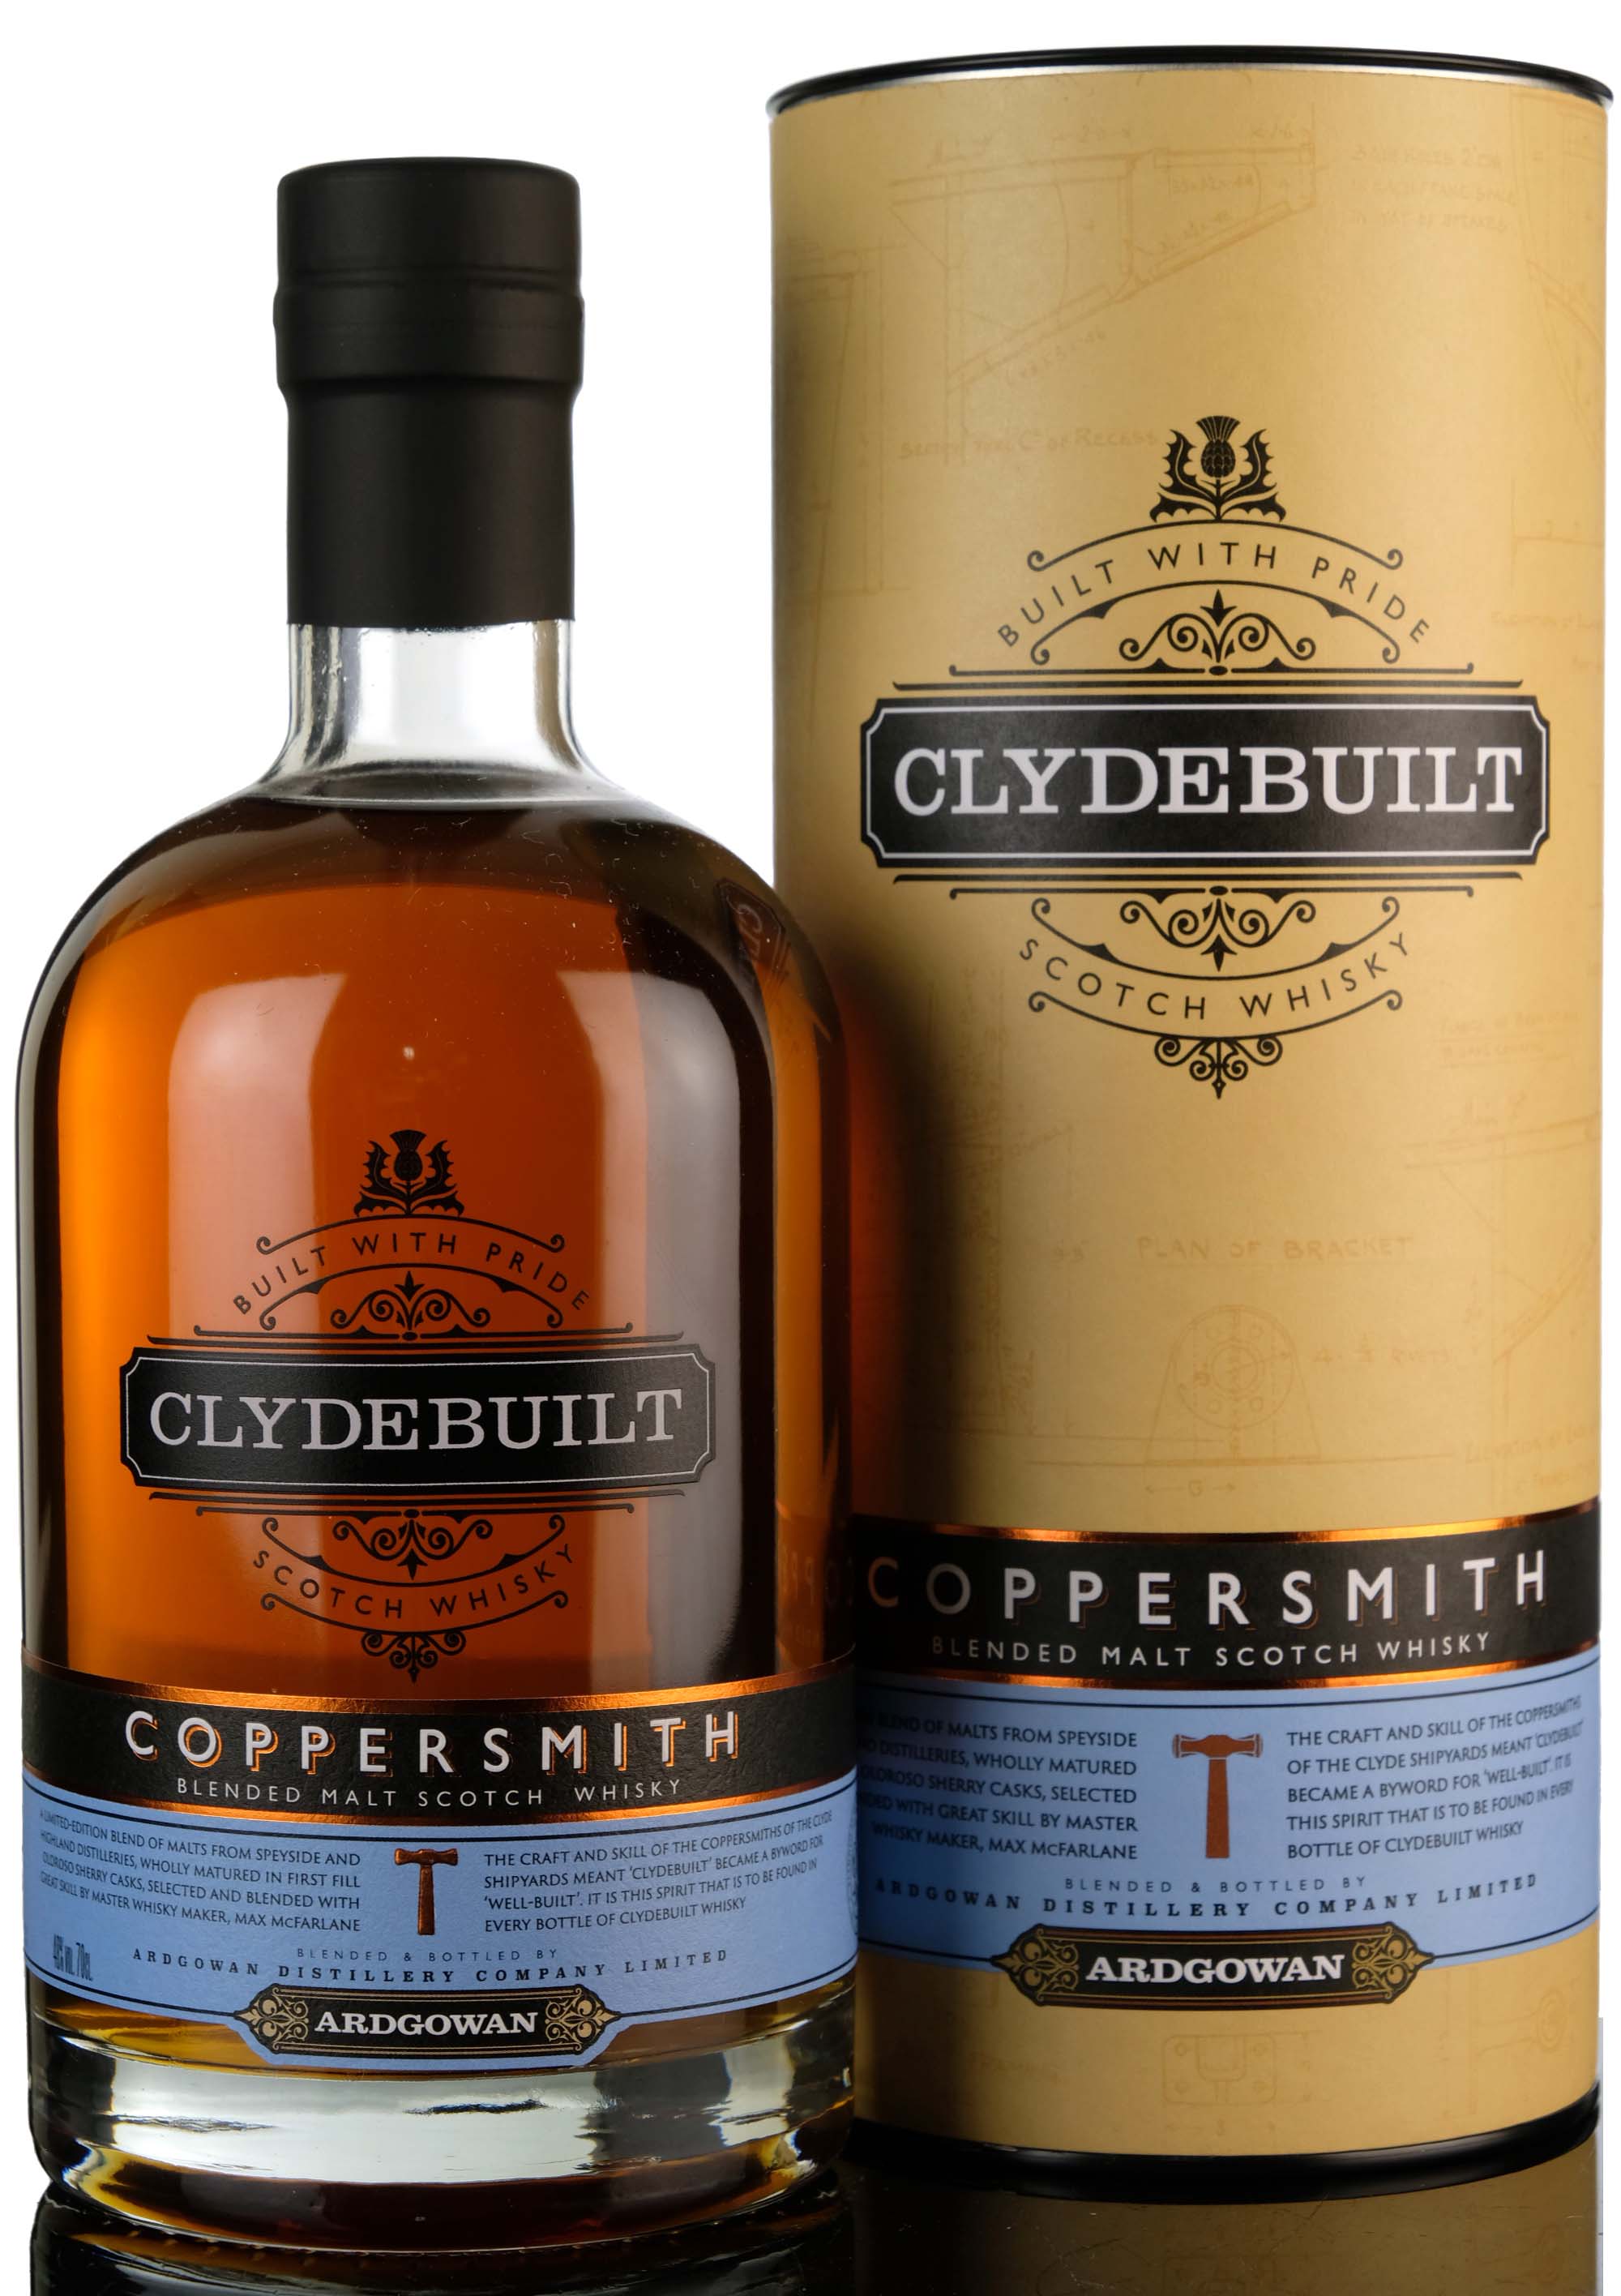 Clydebuilt Coppersmith - 2019 Release